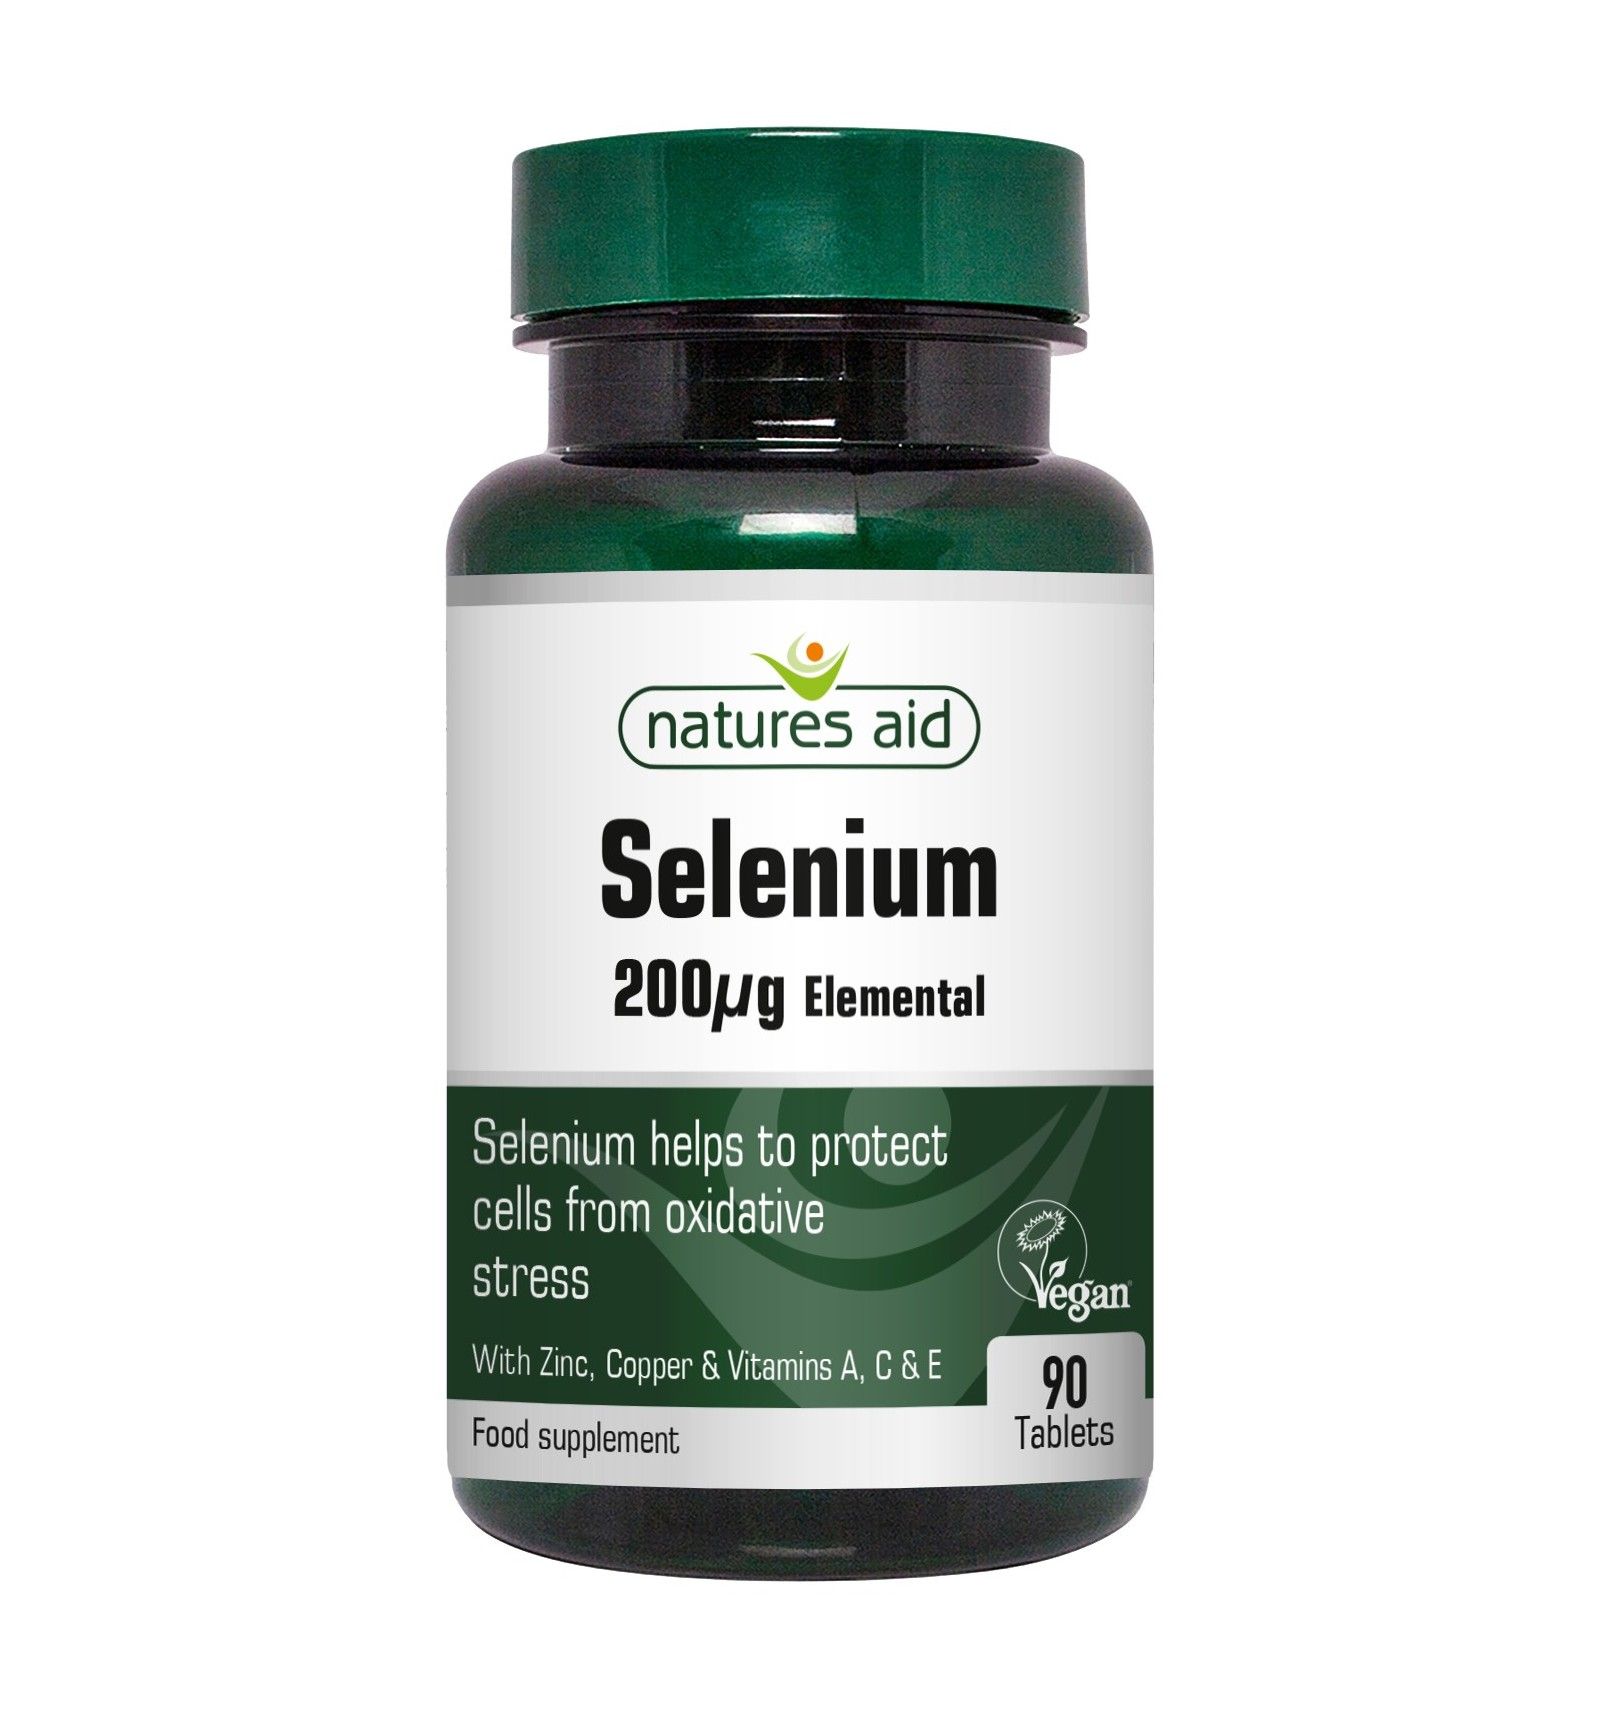 Natures Aid 200ug Selenium - Pack of 90 Tablets